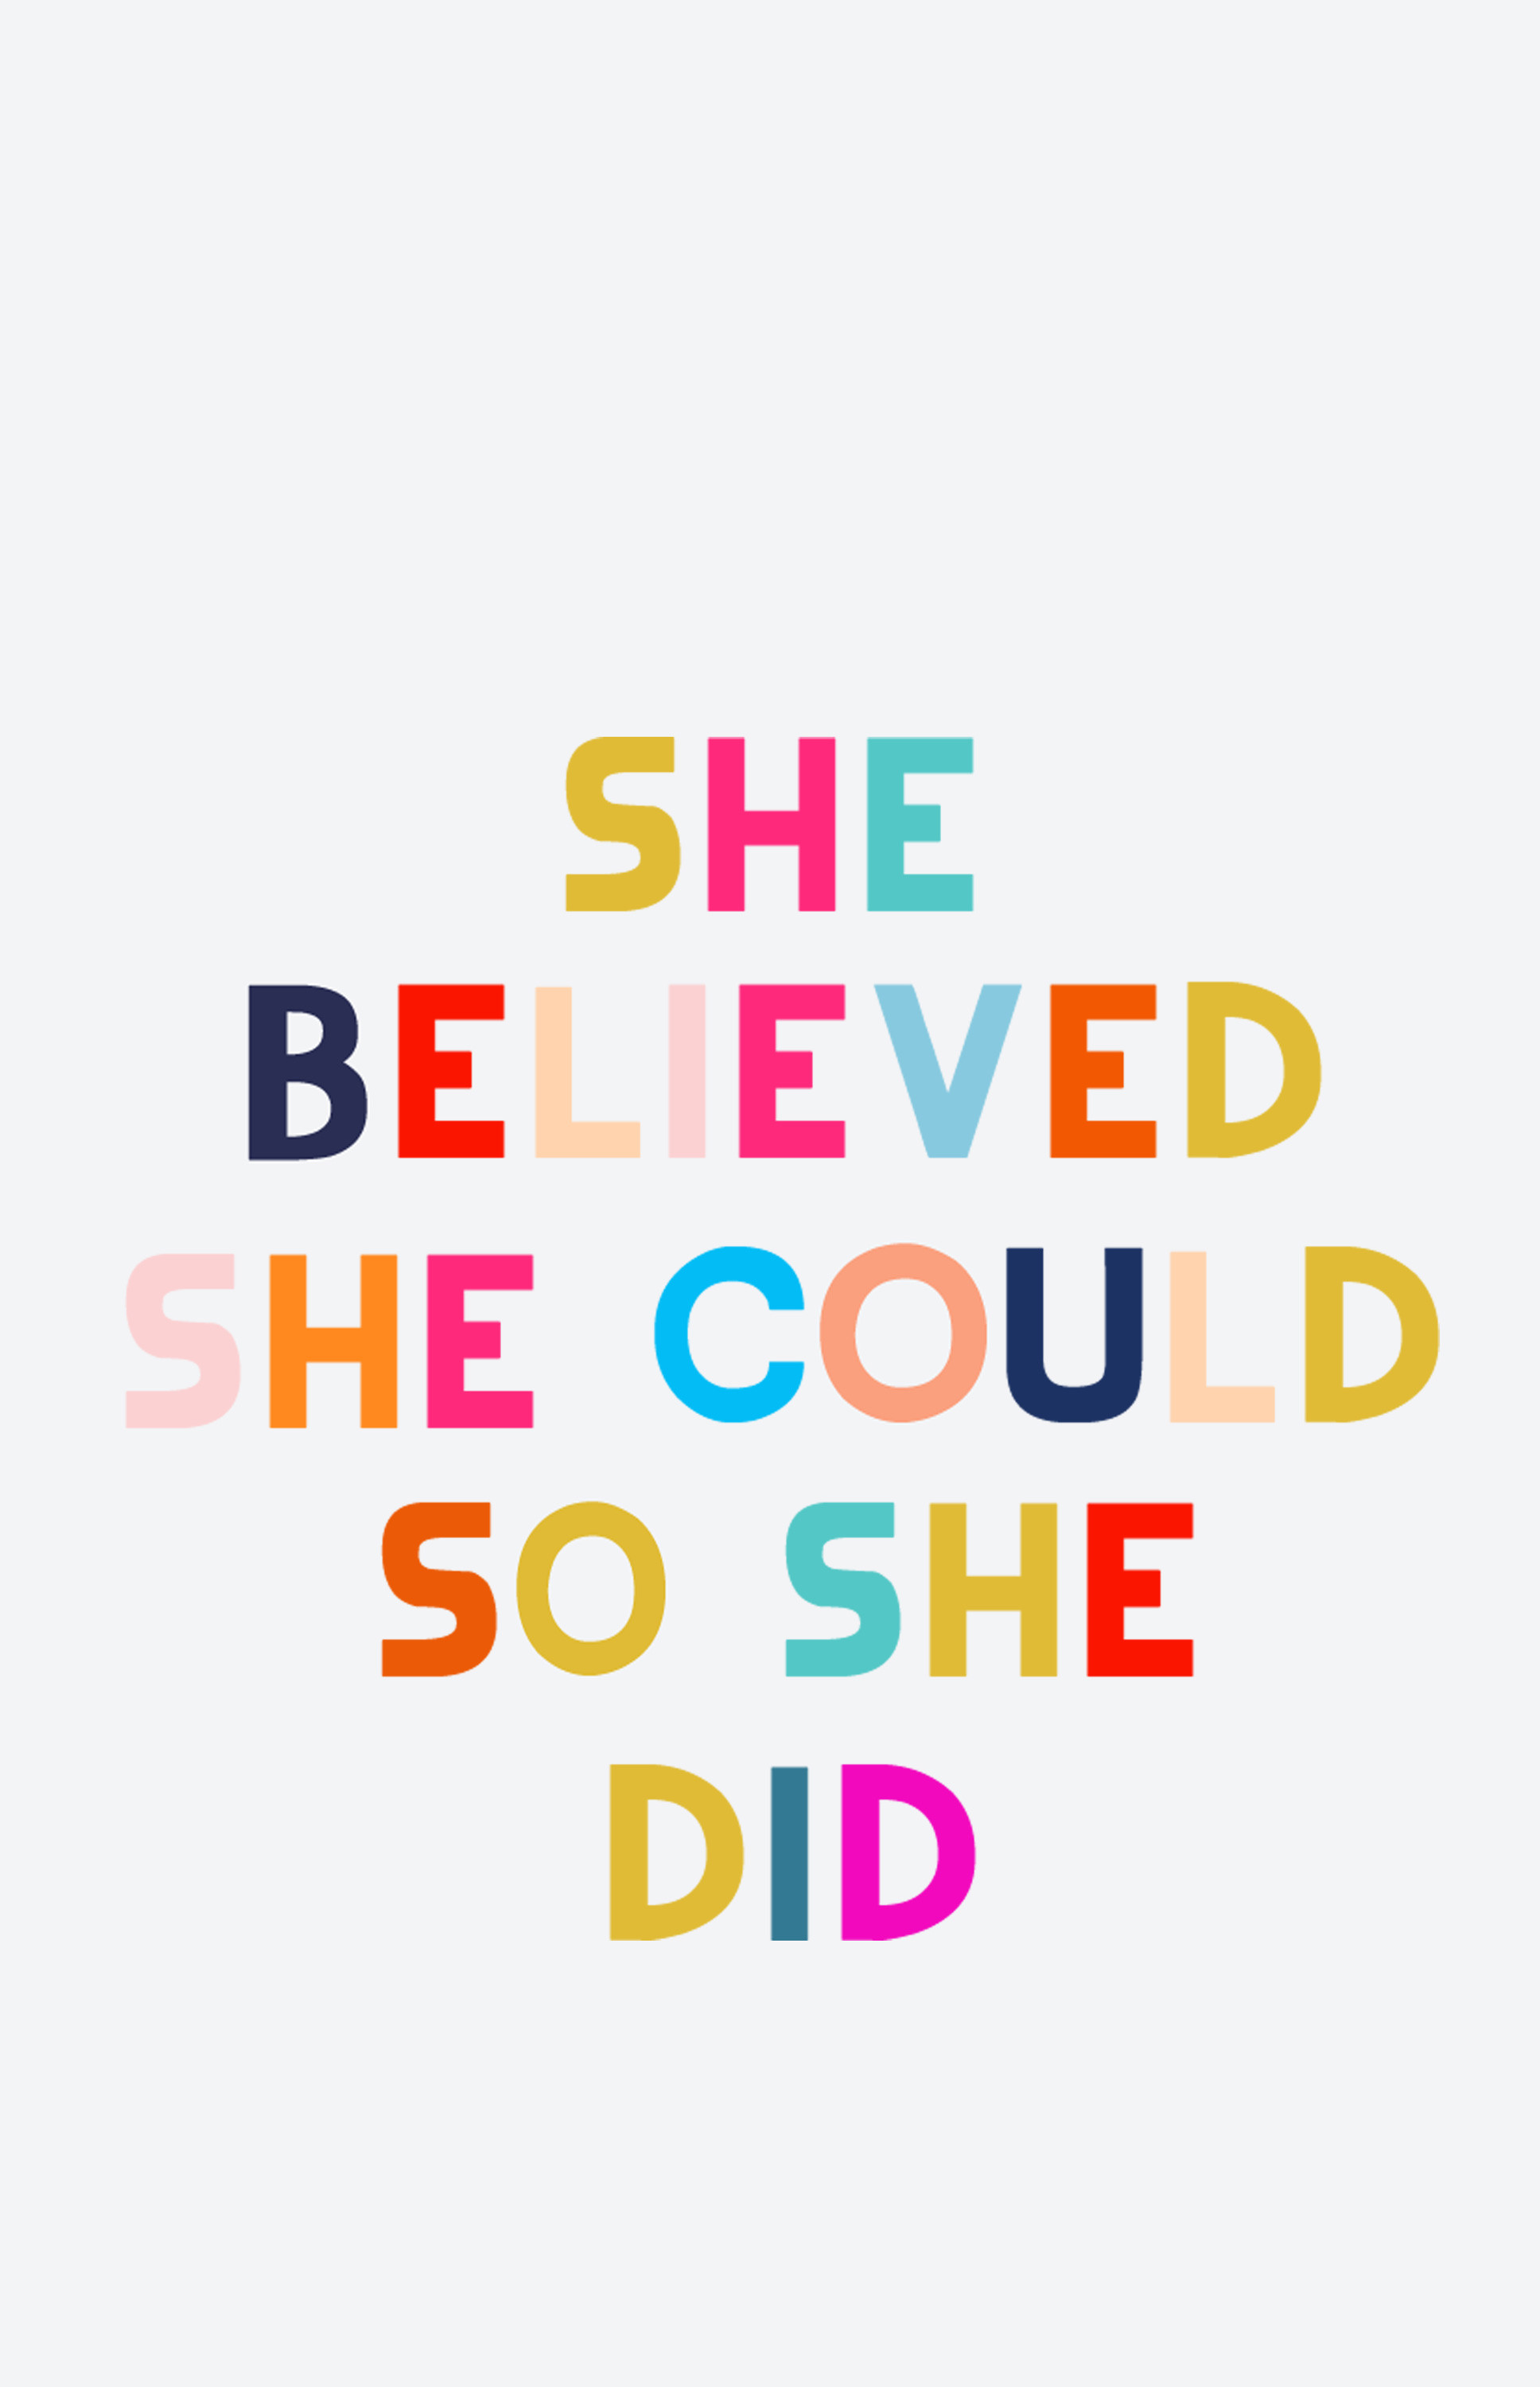 Click To Download - She Believed She Could So She Did , HD Wallpaper & Backgrounds